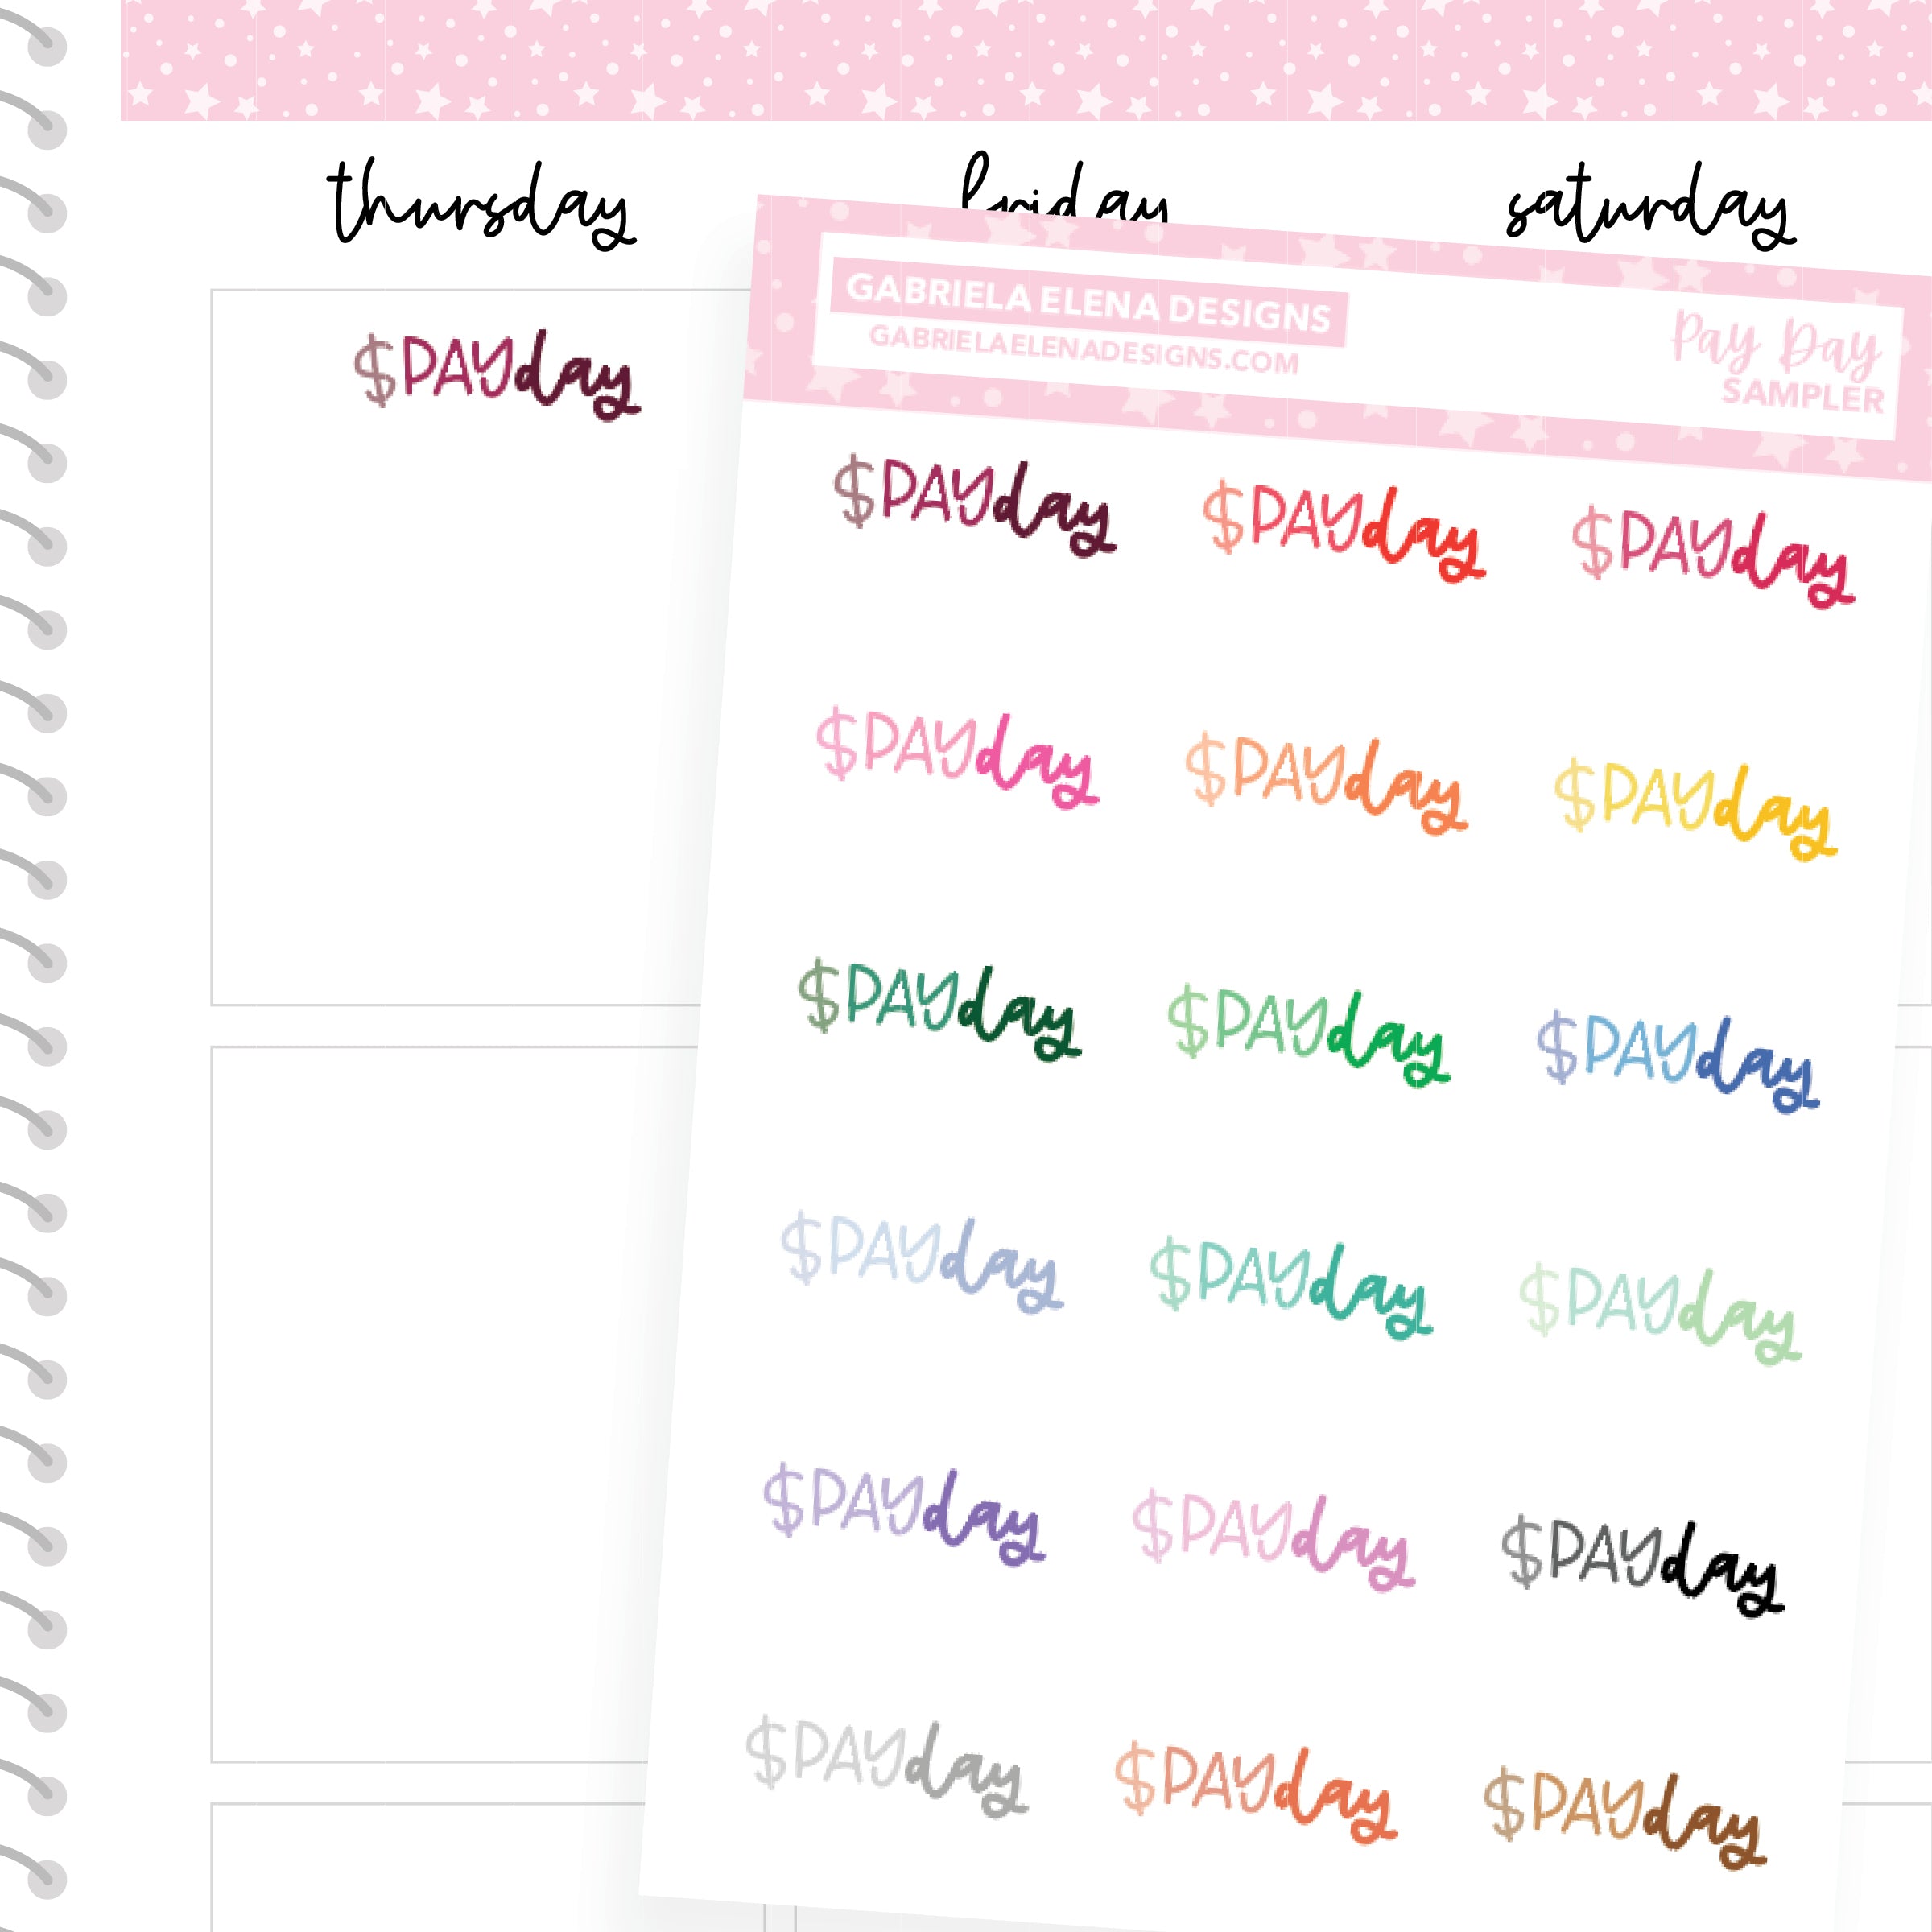 Colorful Paint Swatch Stickers for Planners and Journals